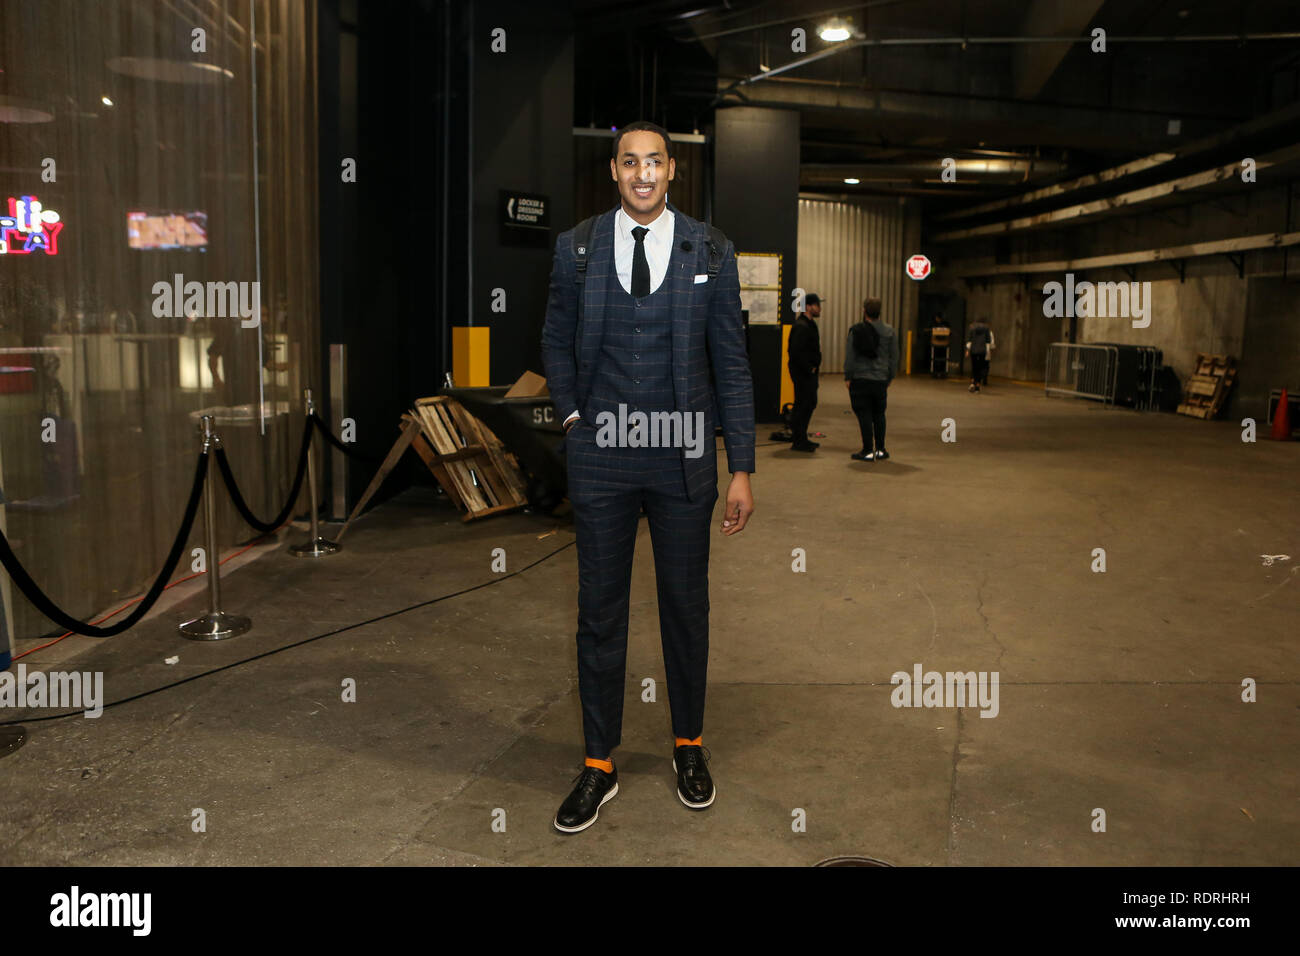 Los Angeles, CA, USA. 18th Jan, 2019. NBA Analyst Ryan Hollis before the Golden State Warriors vs Los Angeles Clippers at Staples Center on January 18, 2019. (Photo by Jevone Moore) Credit: csm/Alamy Live News Stock Photo